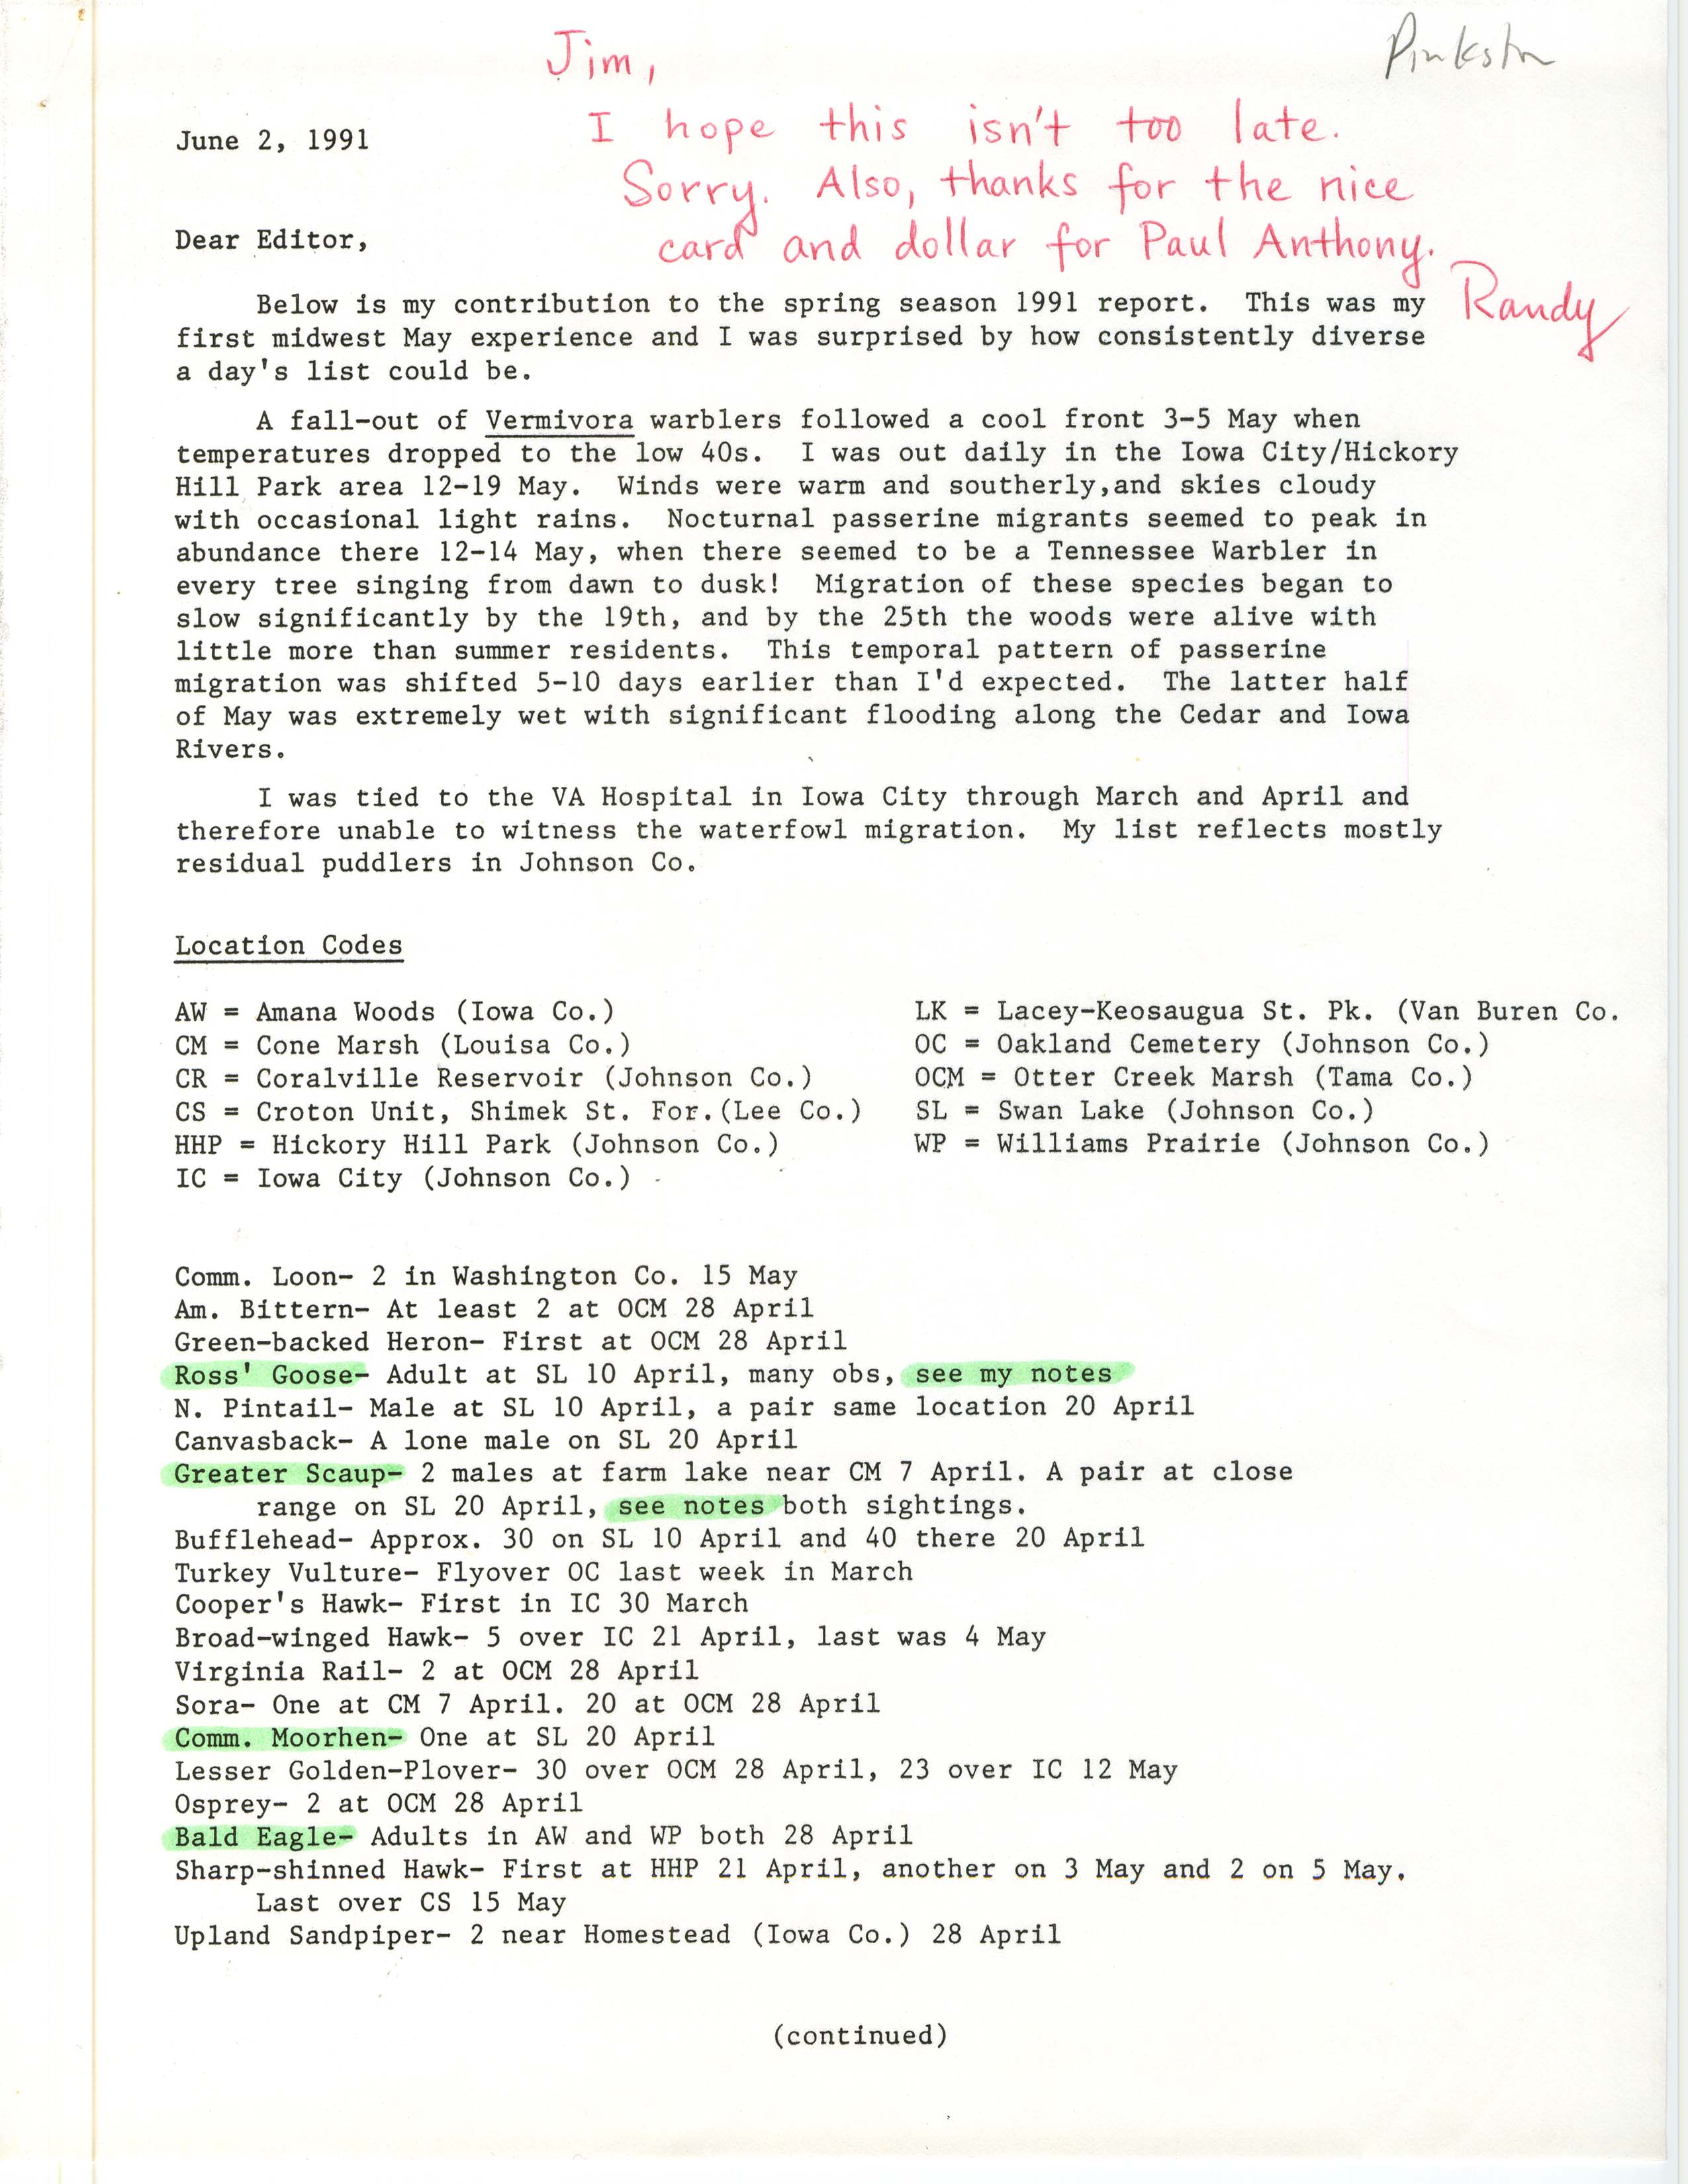 Randall Pinkston letter to James Dinsmore regarding bird sightings for the official field report, June 2, 1991